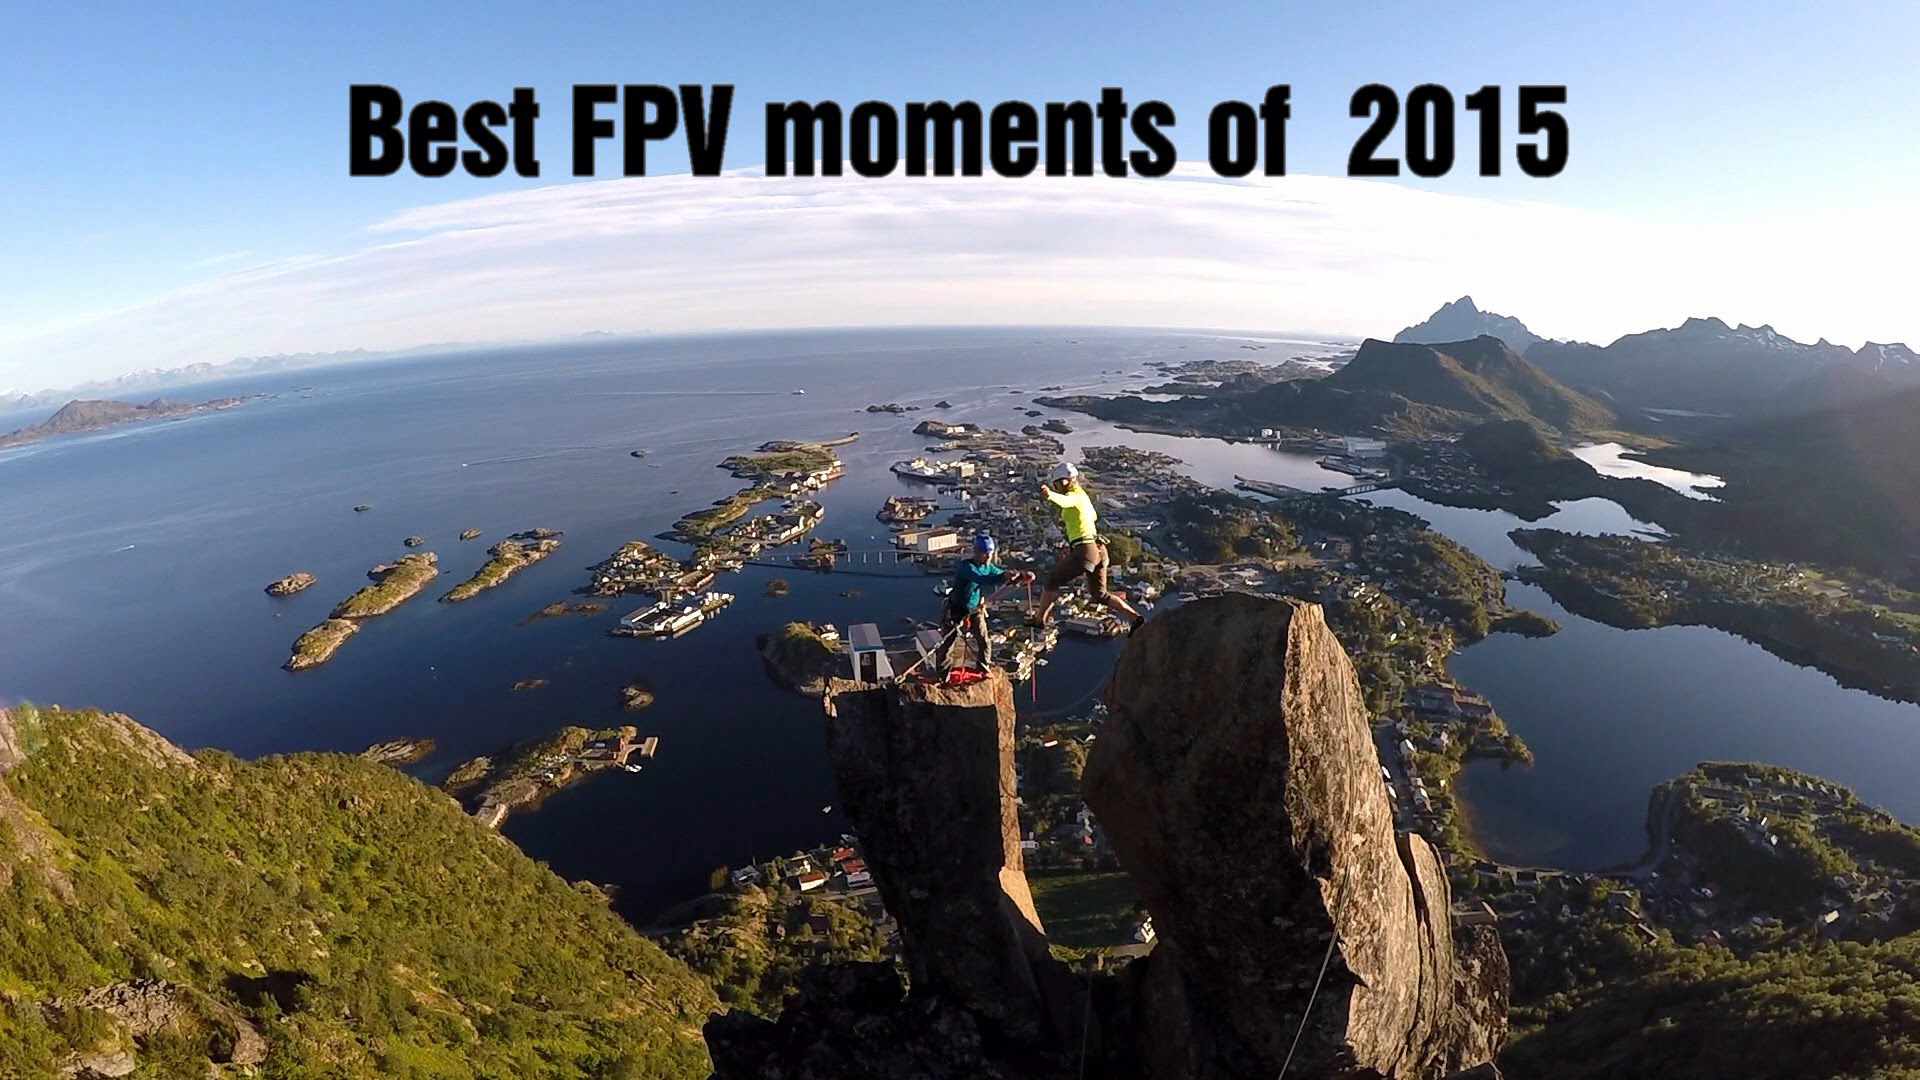 FPV Best moments of 2015 | Flying Fast With Quadcopter Source